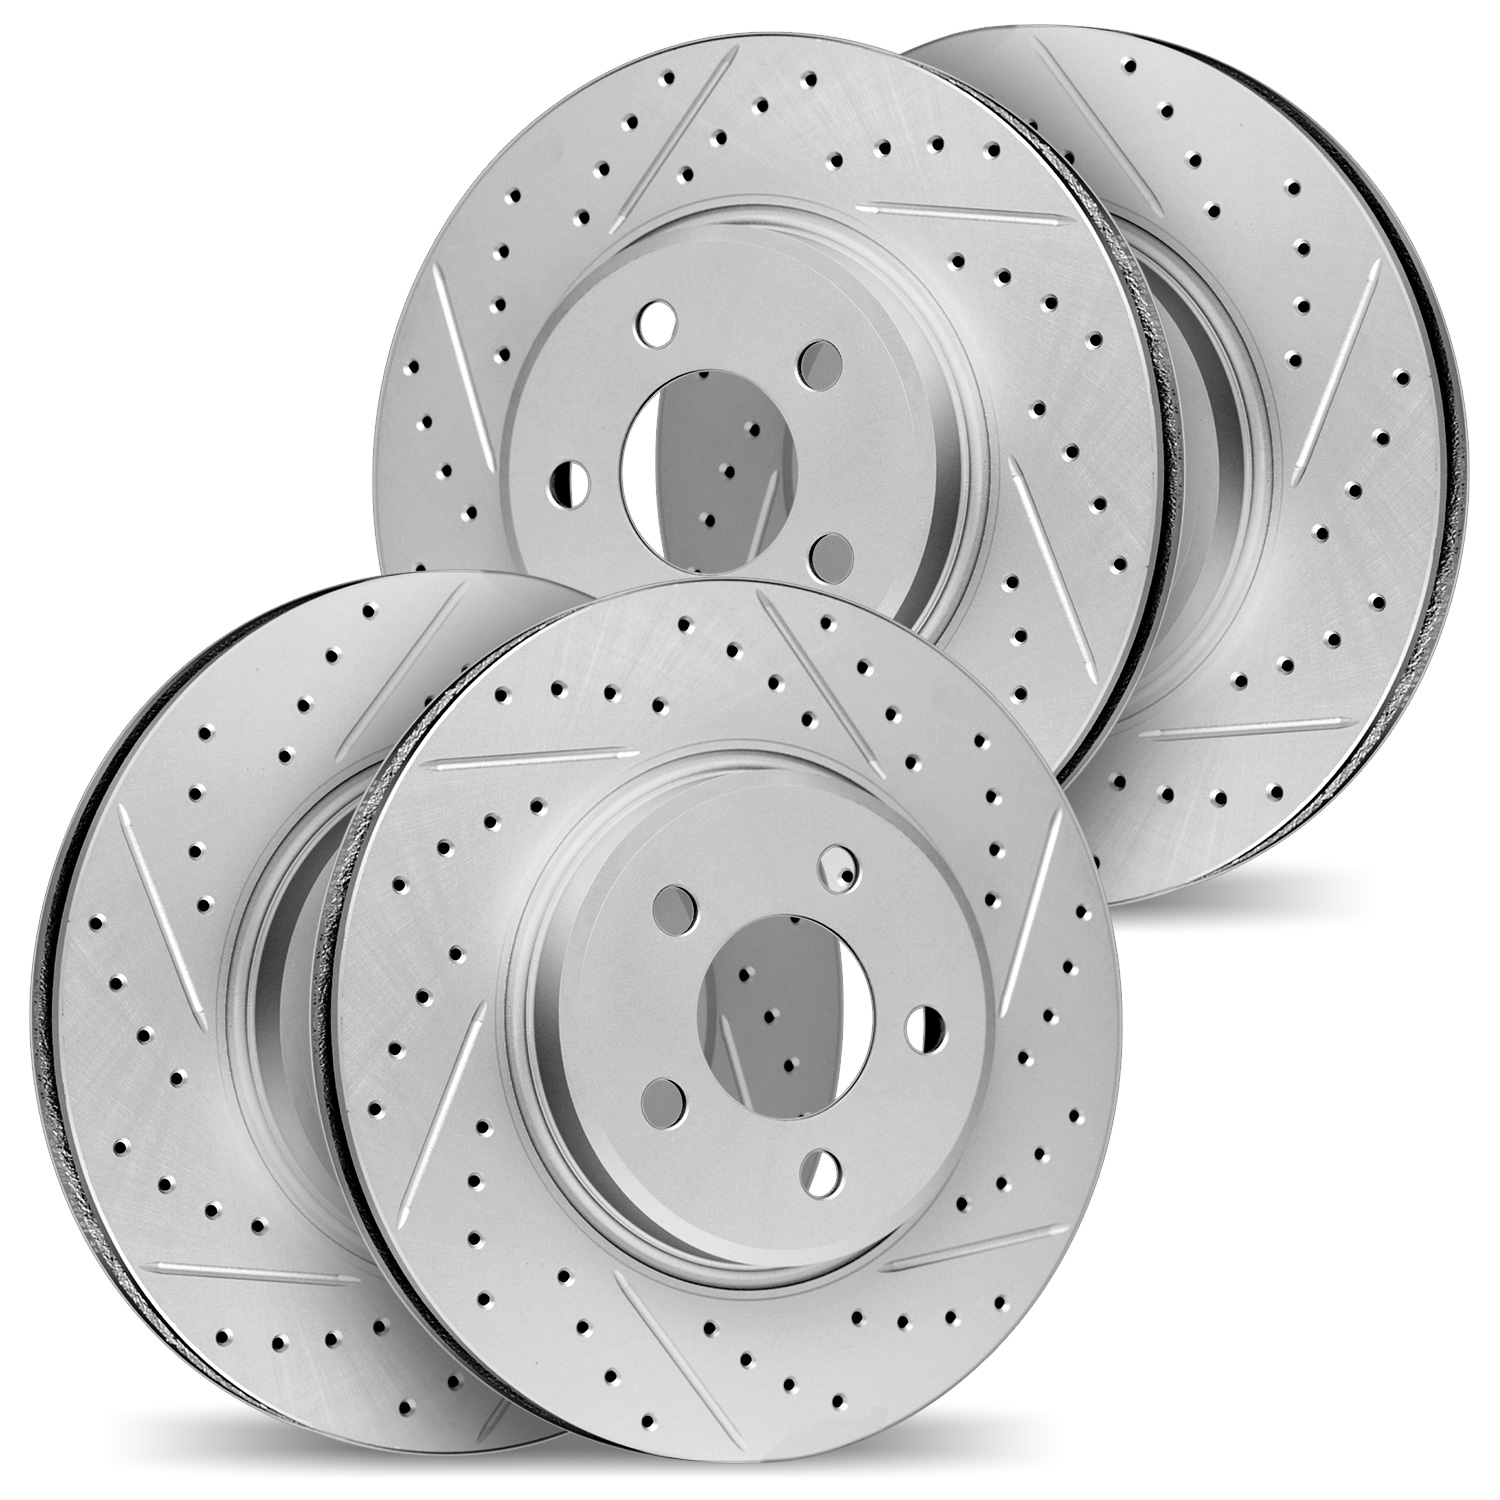 2004-65006 Geoperformance Drilled/Slotted Brake Rotors, 2006-2007 GM, Position: Front and Rear